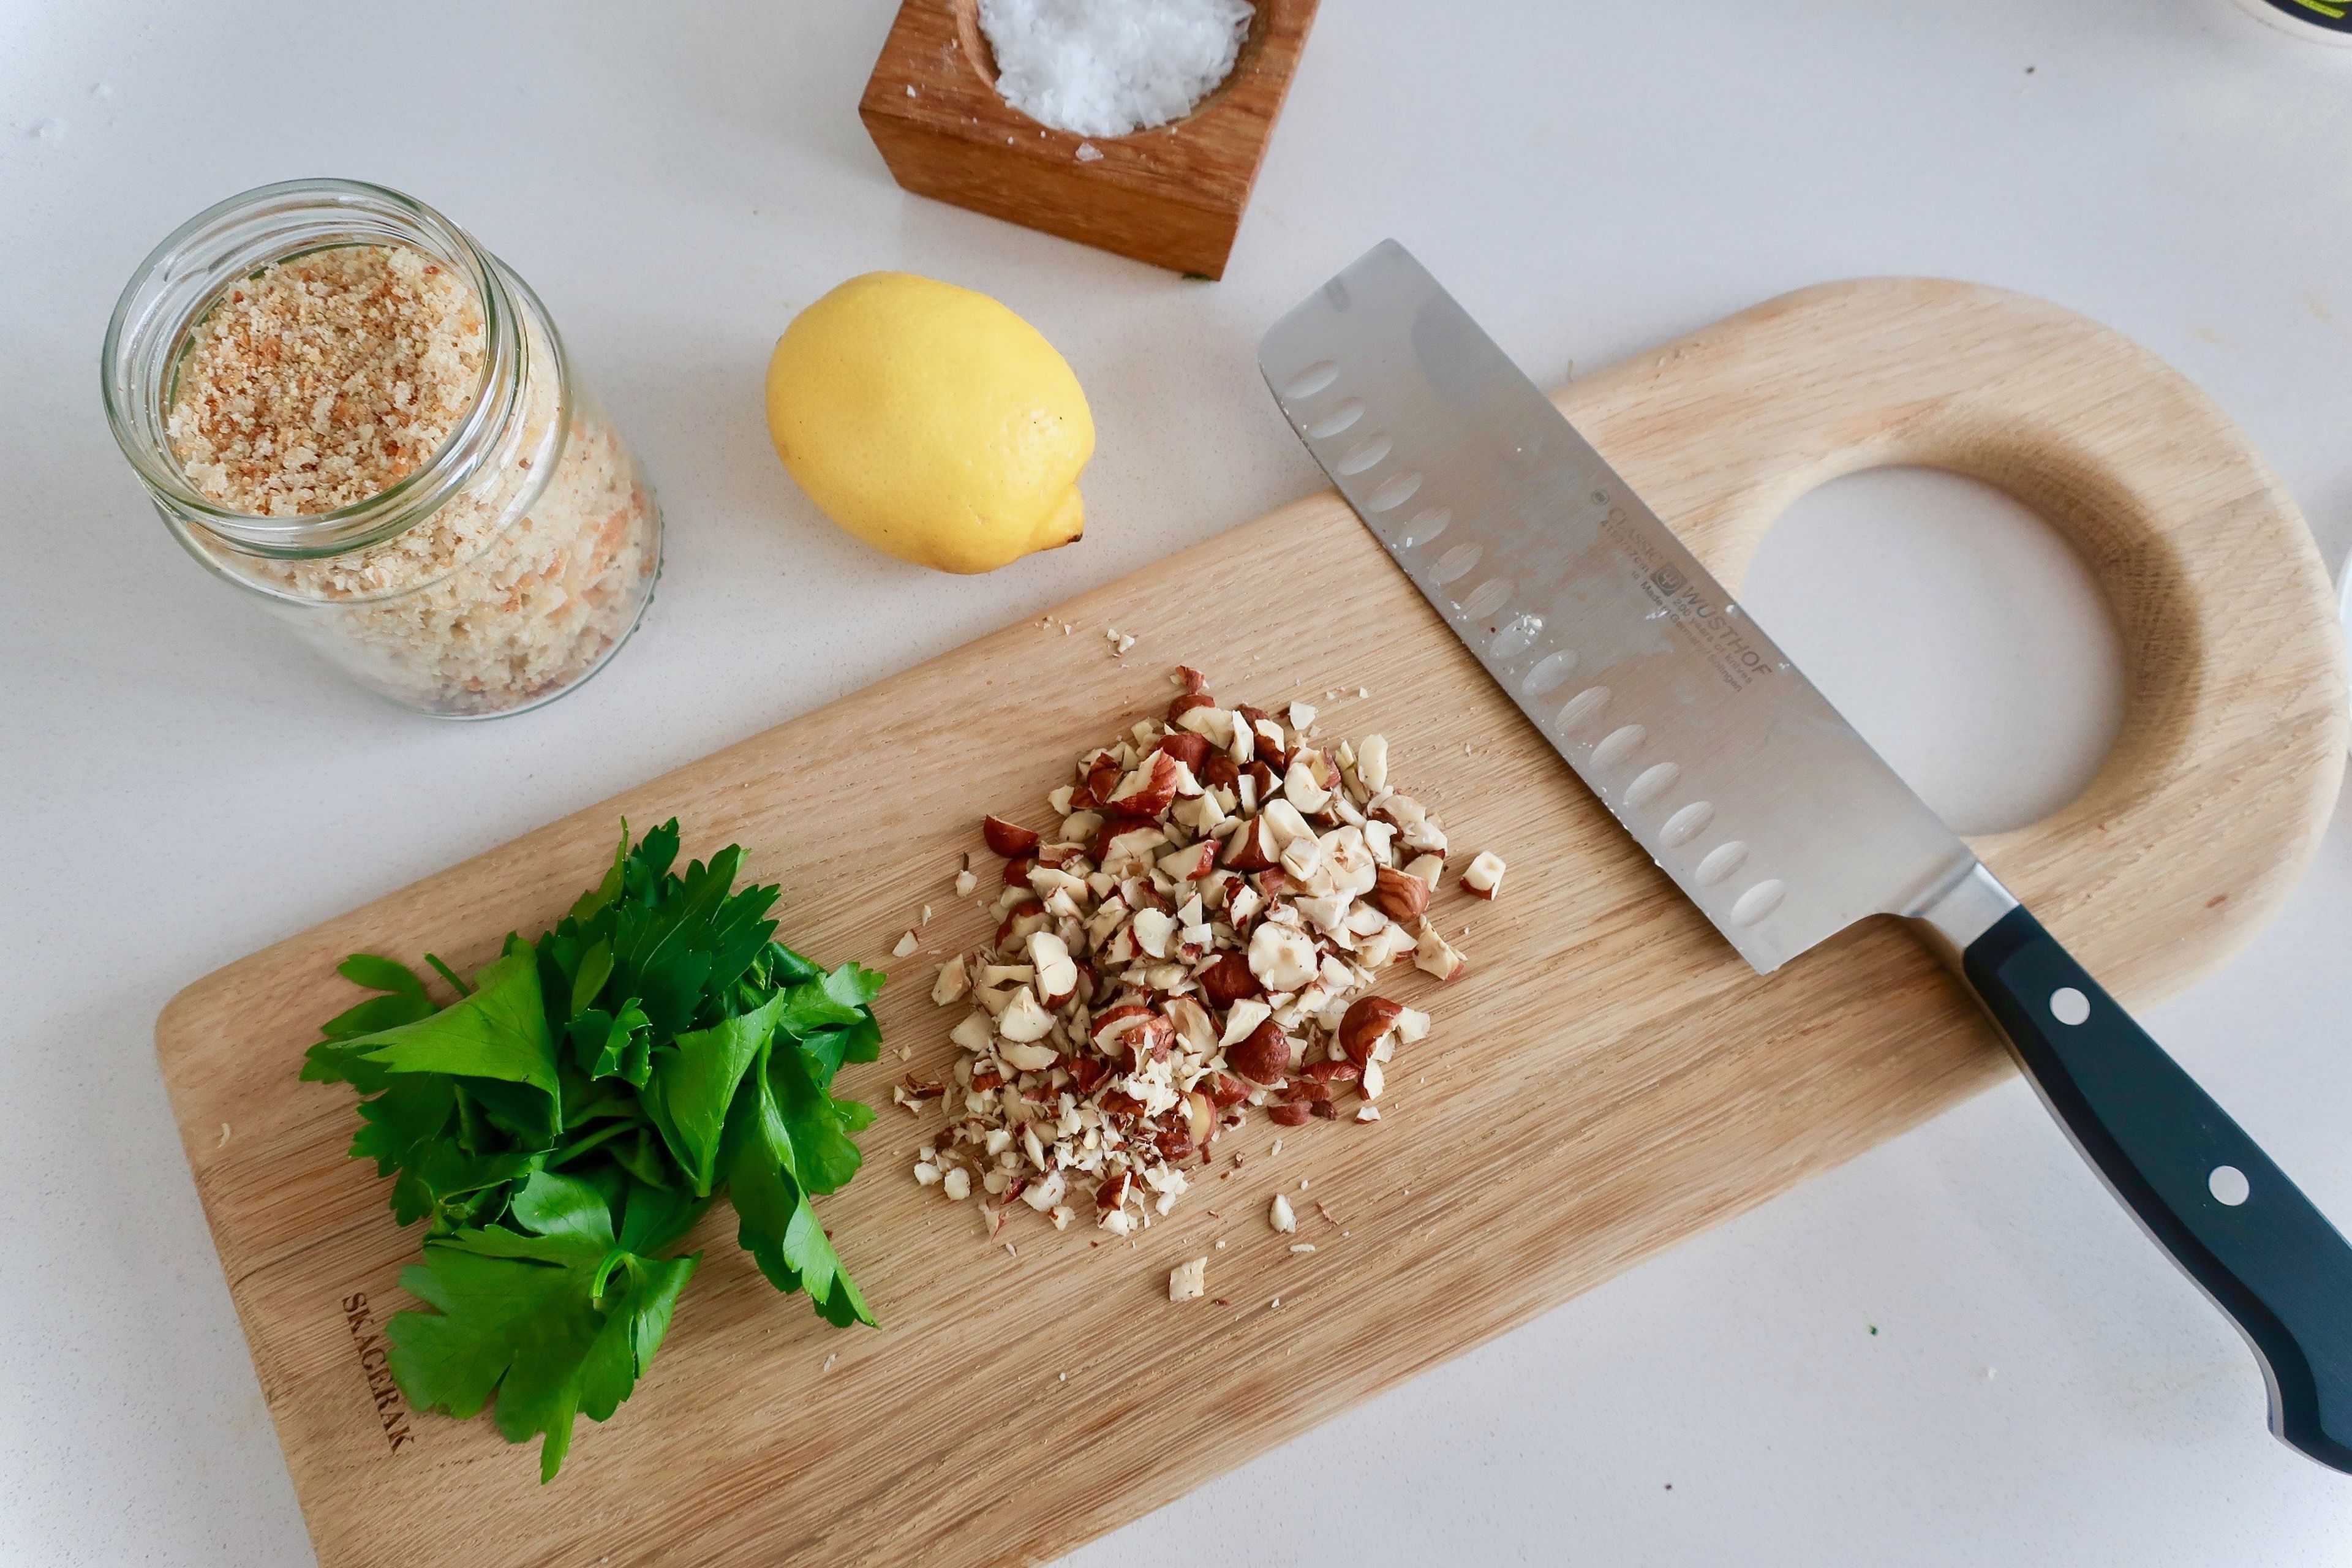 Meanwhile, to make the gremolata, roughly chop the hazelnuts, finely chop parsley and zest half a lemon. Add a little oil to a frying pan over medium heat. Add breadcrumbs and hazelnuts and fry until toasted. Remove from heat, let cool slightly and mix with the parsley, lemon zest, and a pinch of salt.